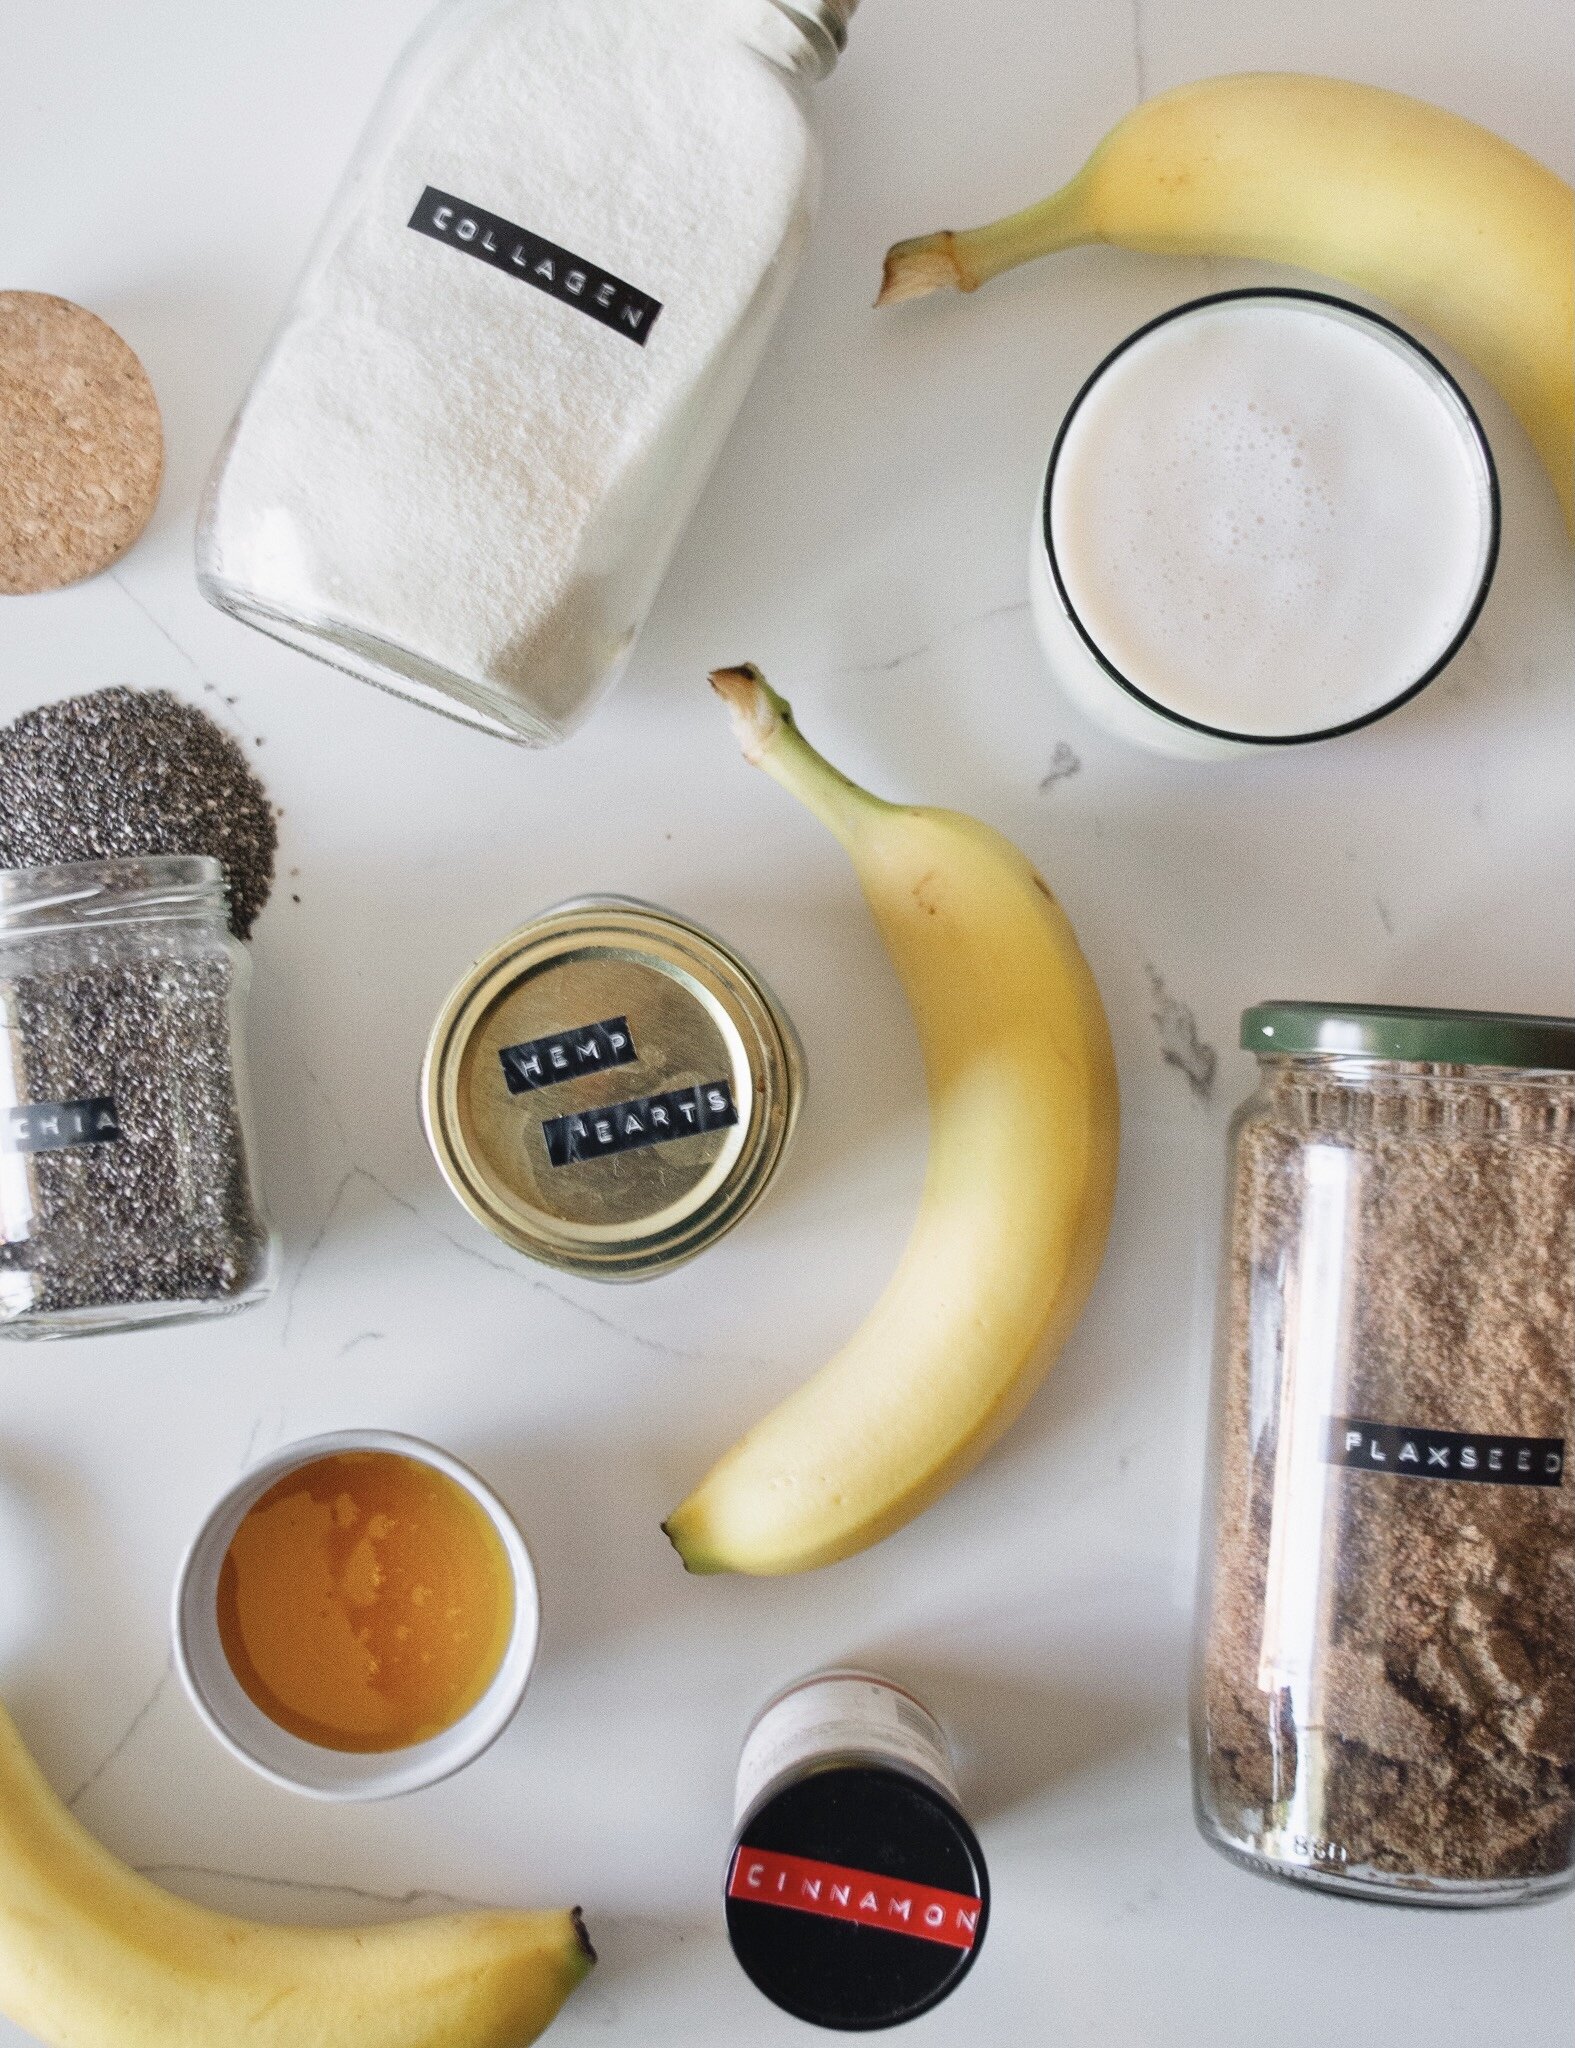 Ingredients for Collagen Superfood Banana Smoothie